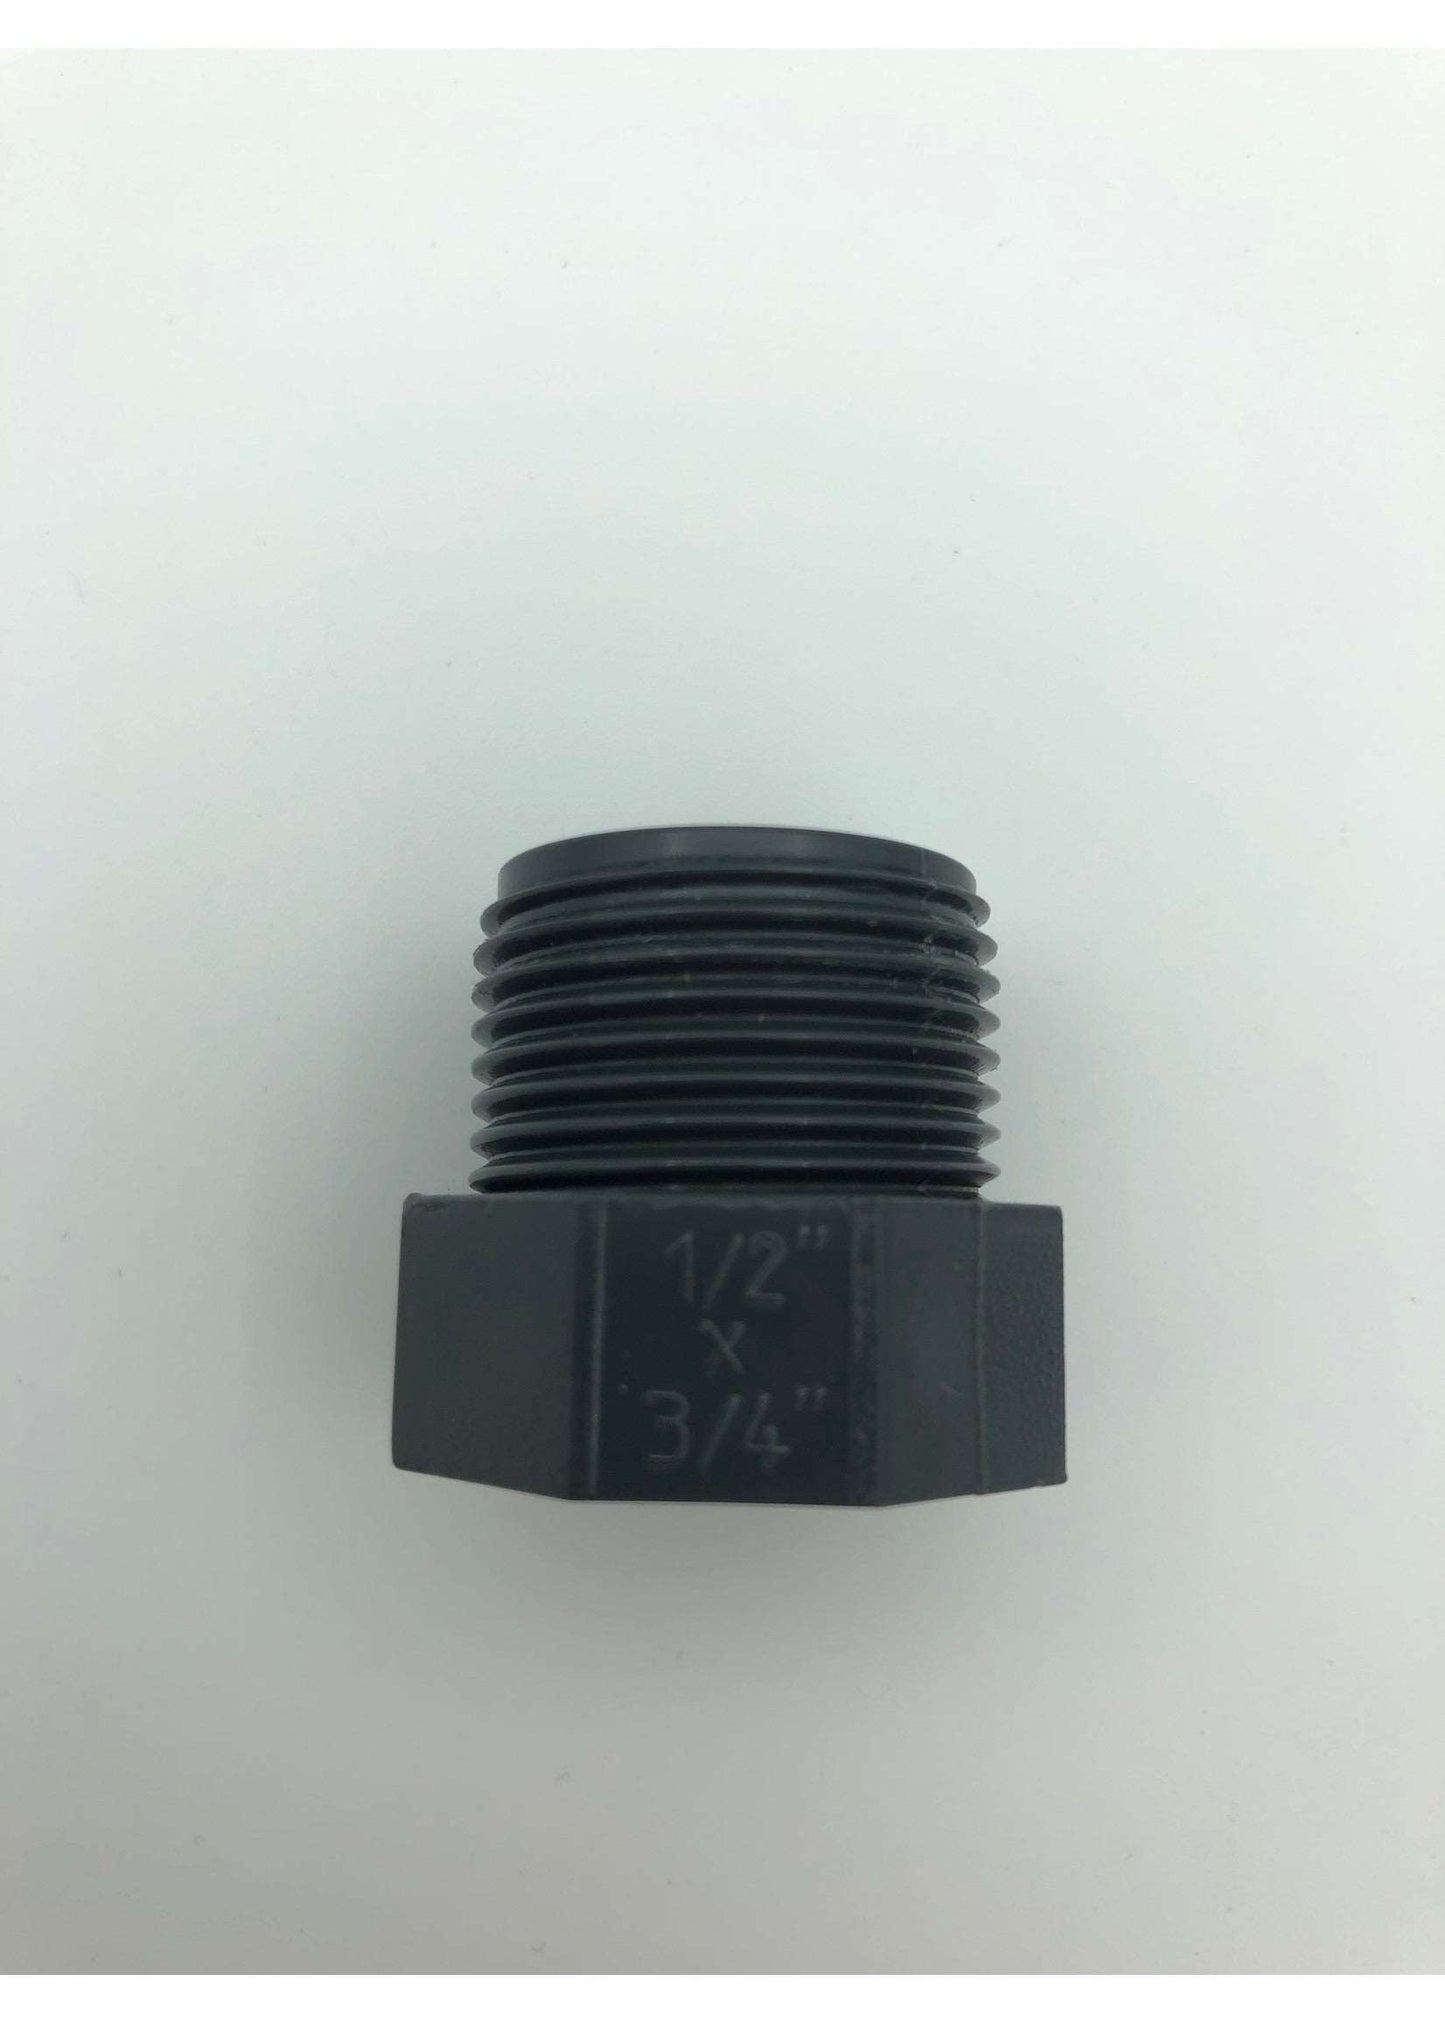 Adapter ring 1/2 inch to 3/4 inch